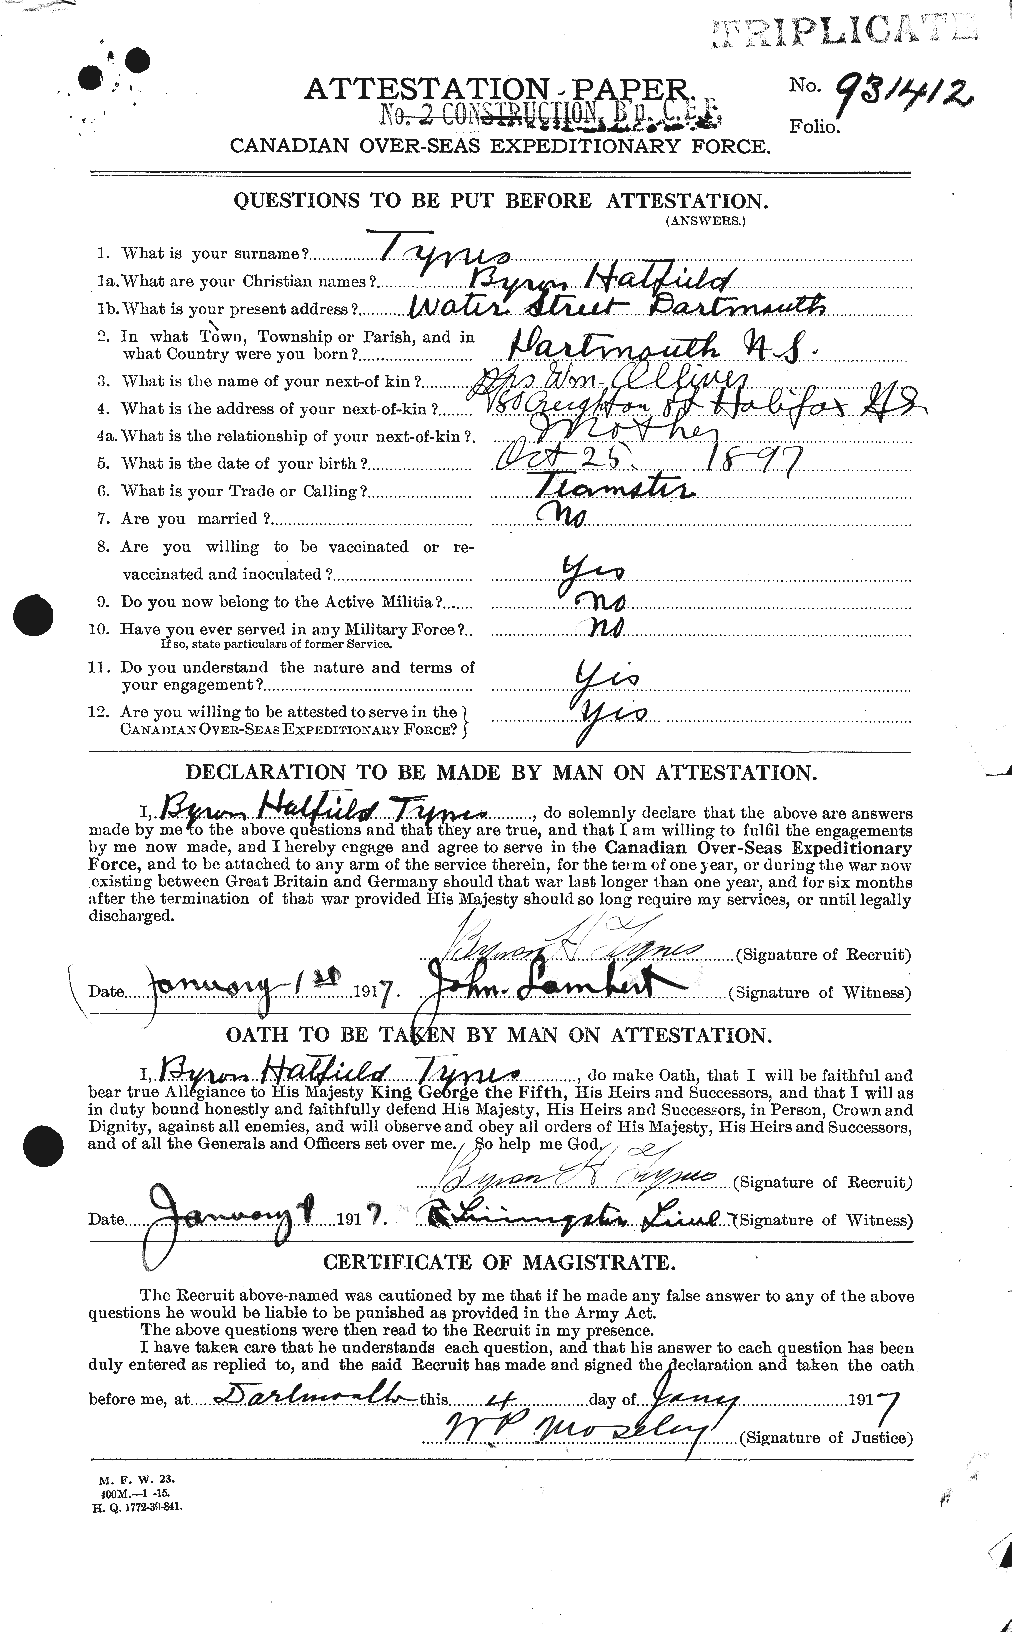 Personnel Records of the First World War - CEF 644535a